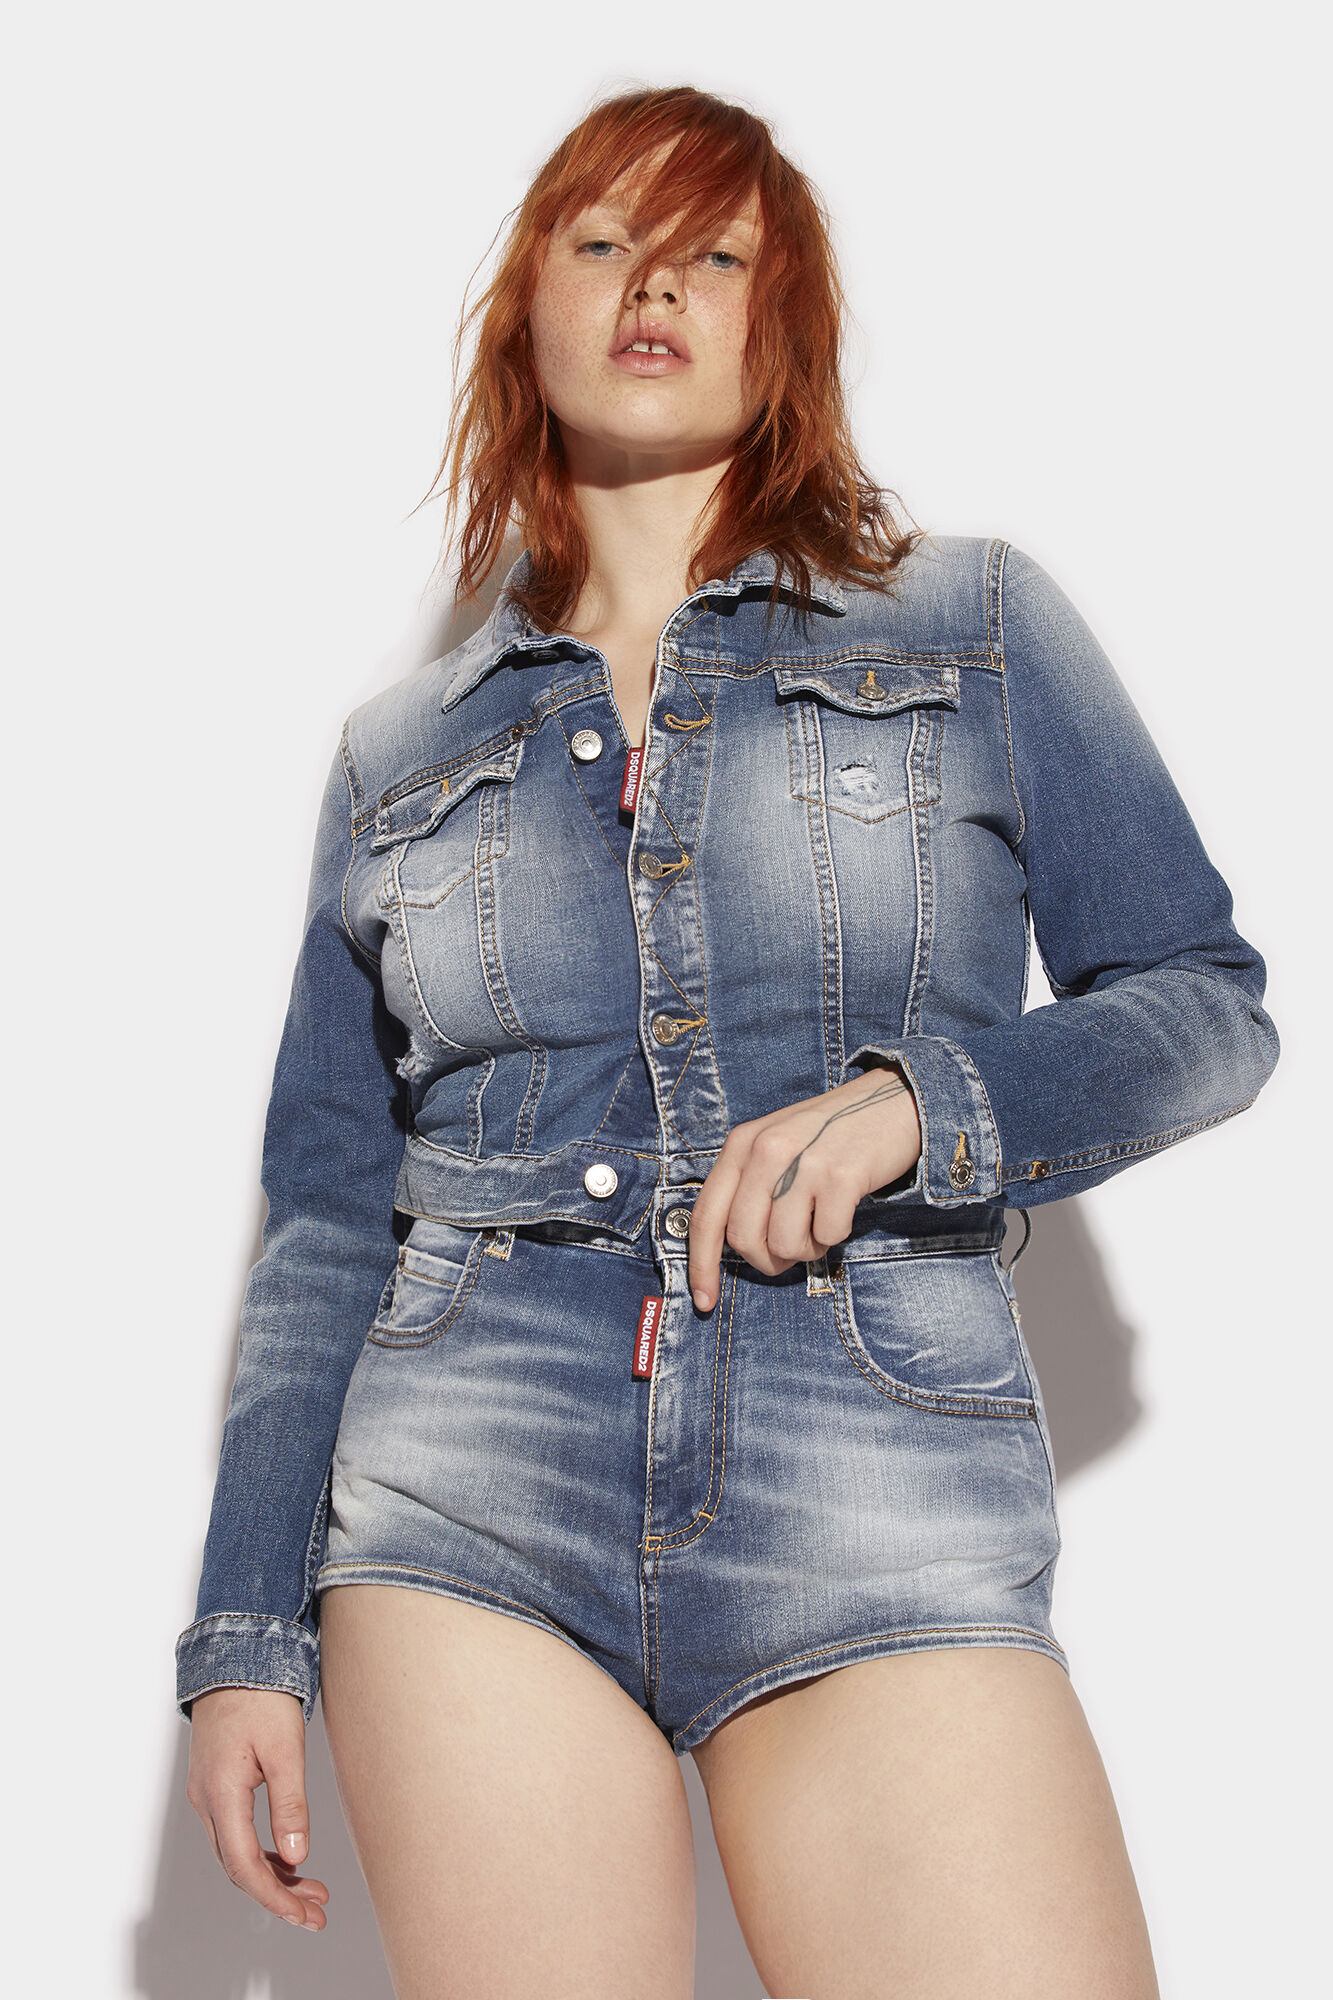 Girl in Hot Pants and Crop Top Stock Photo - Image of denim, fashion:  102019676